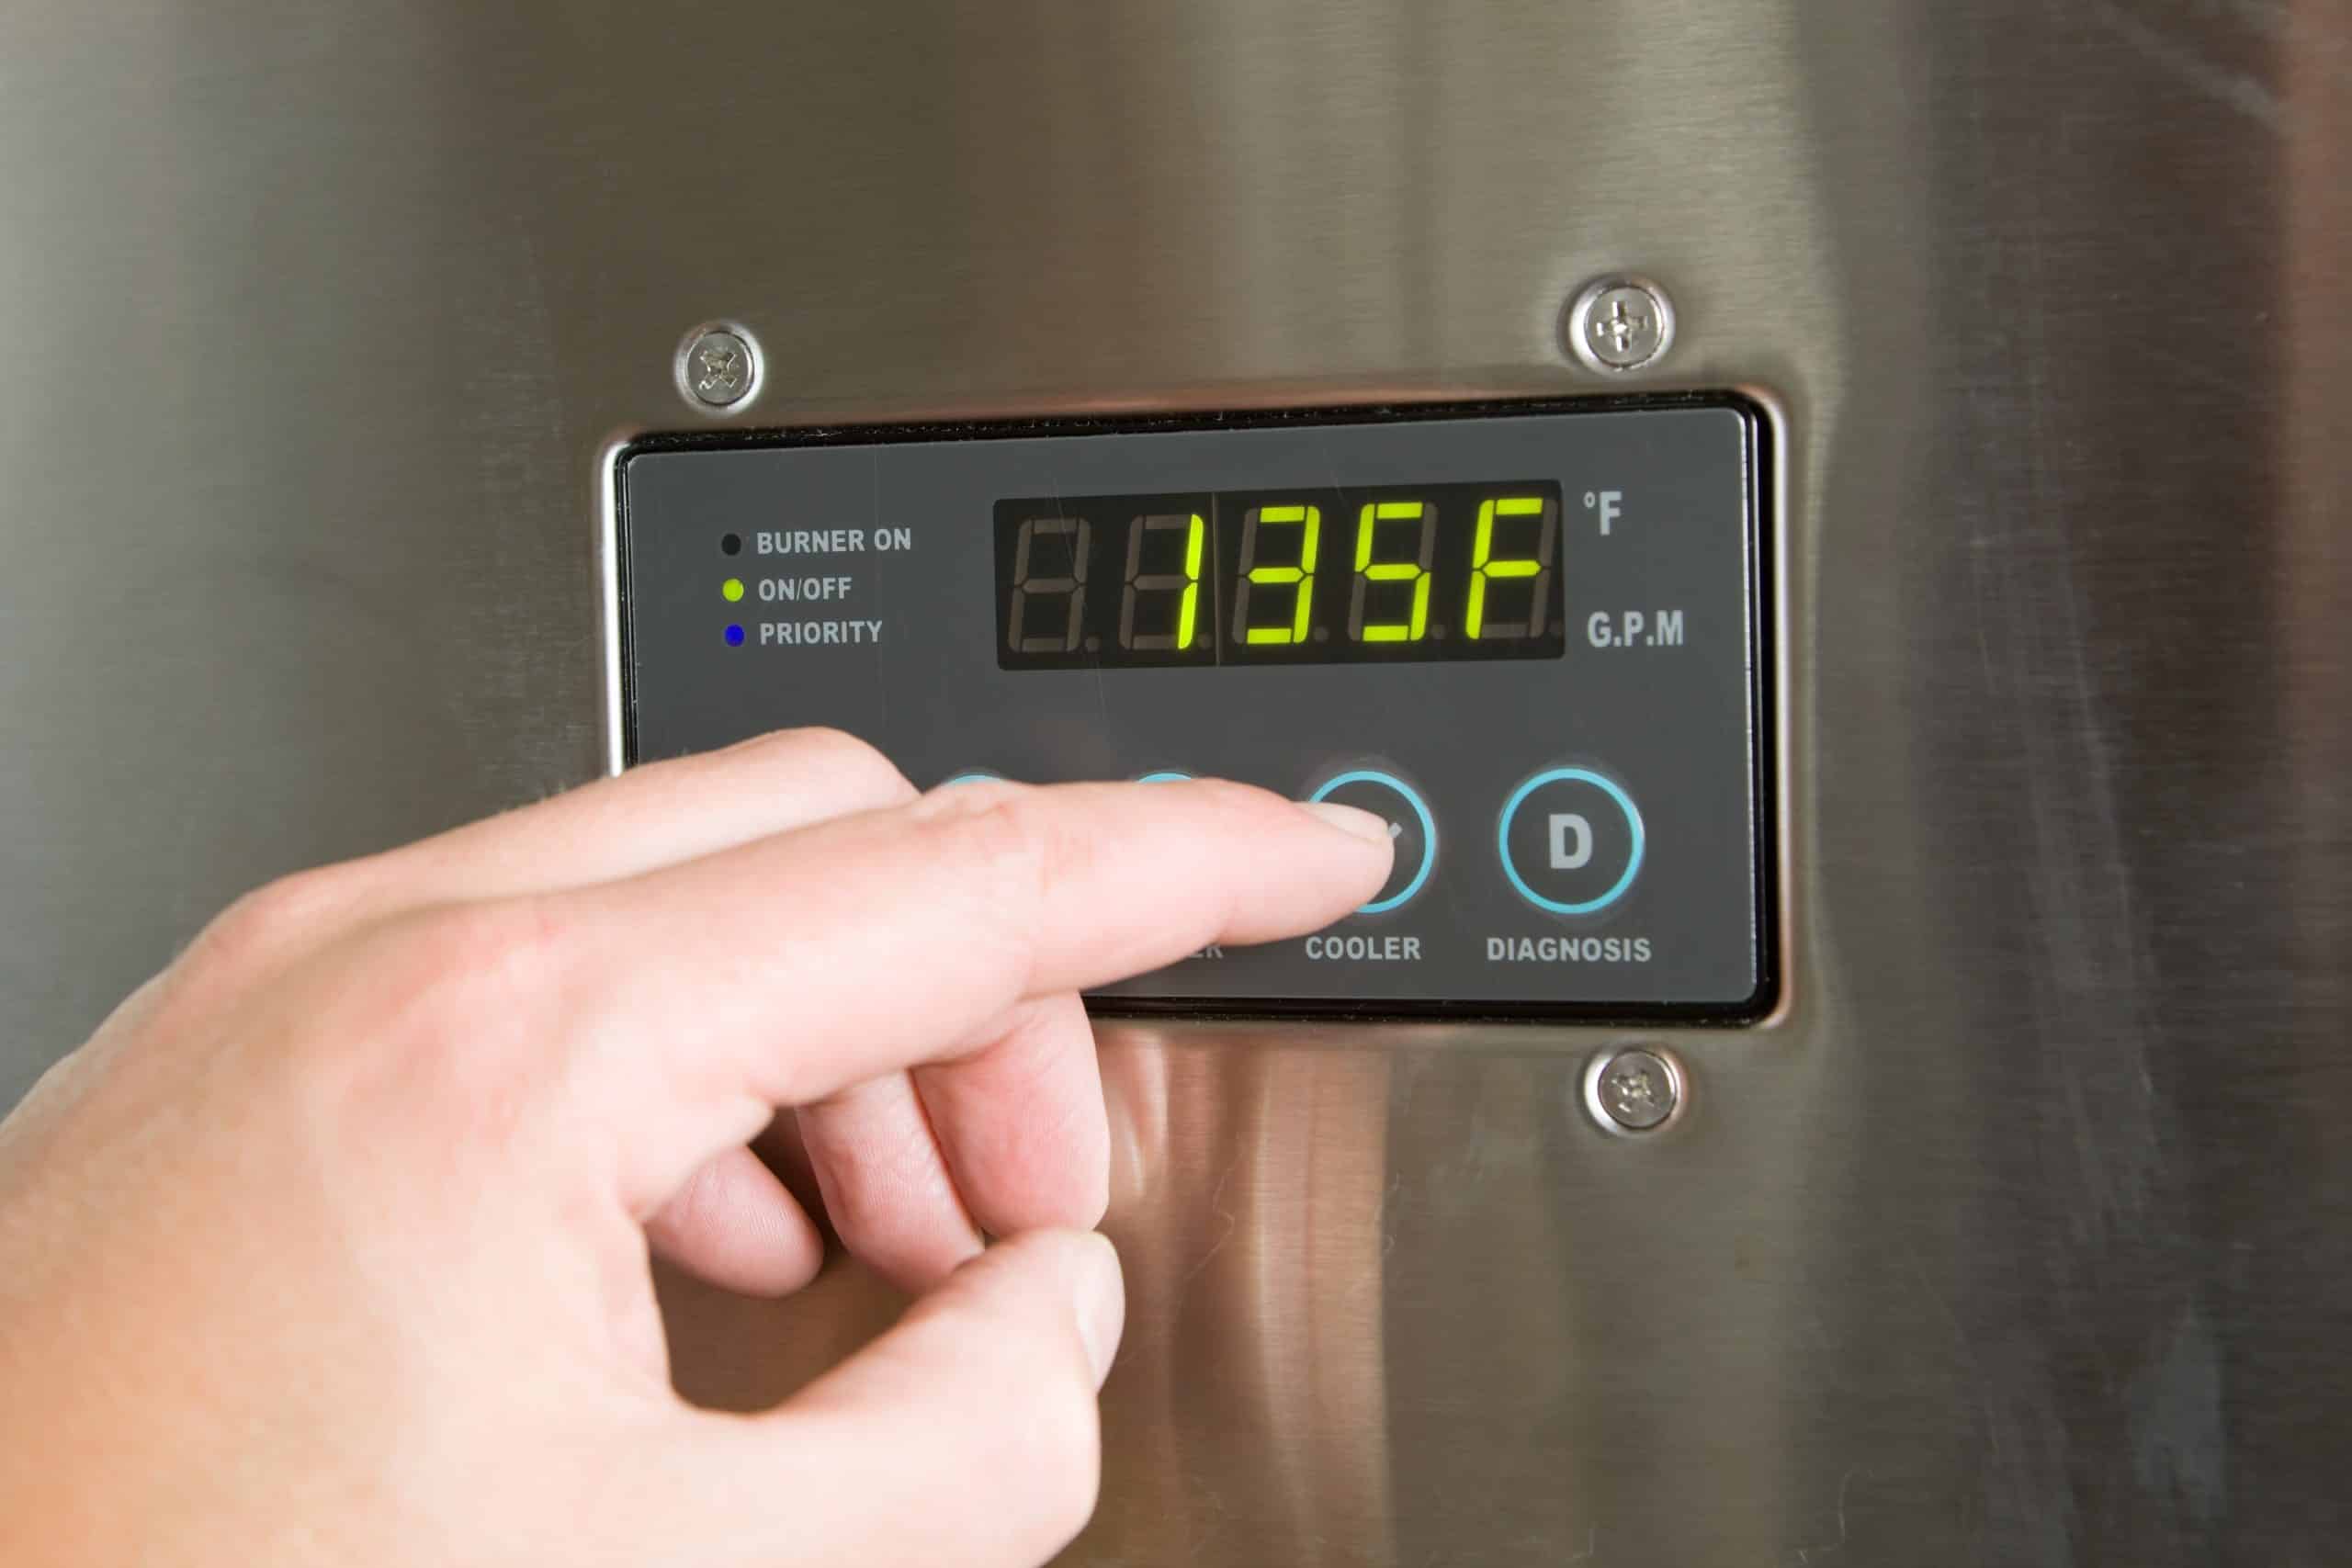 A person’s finger presses a button on the electric control panel of a tankless water heater